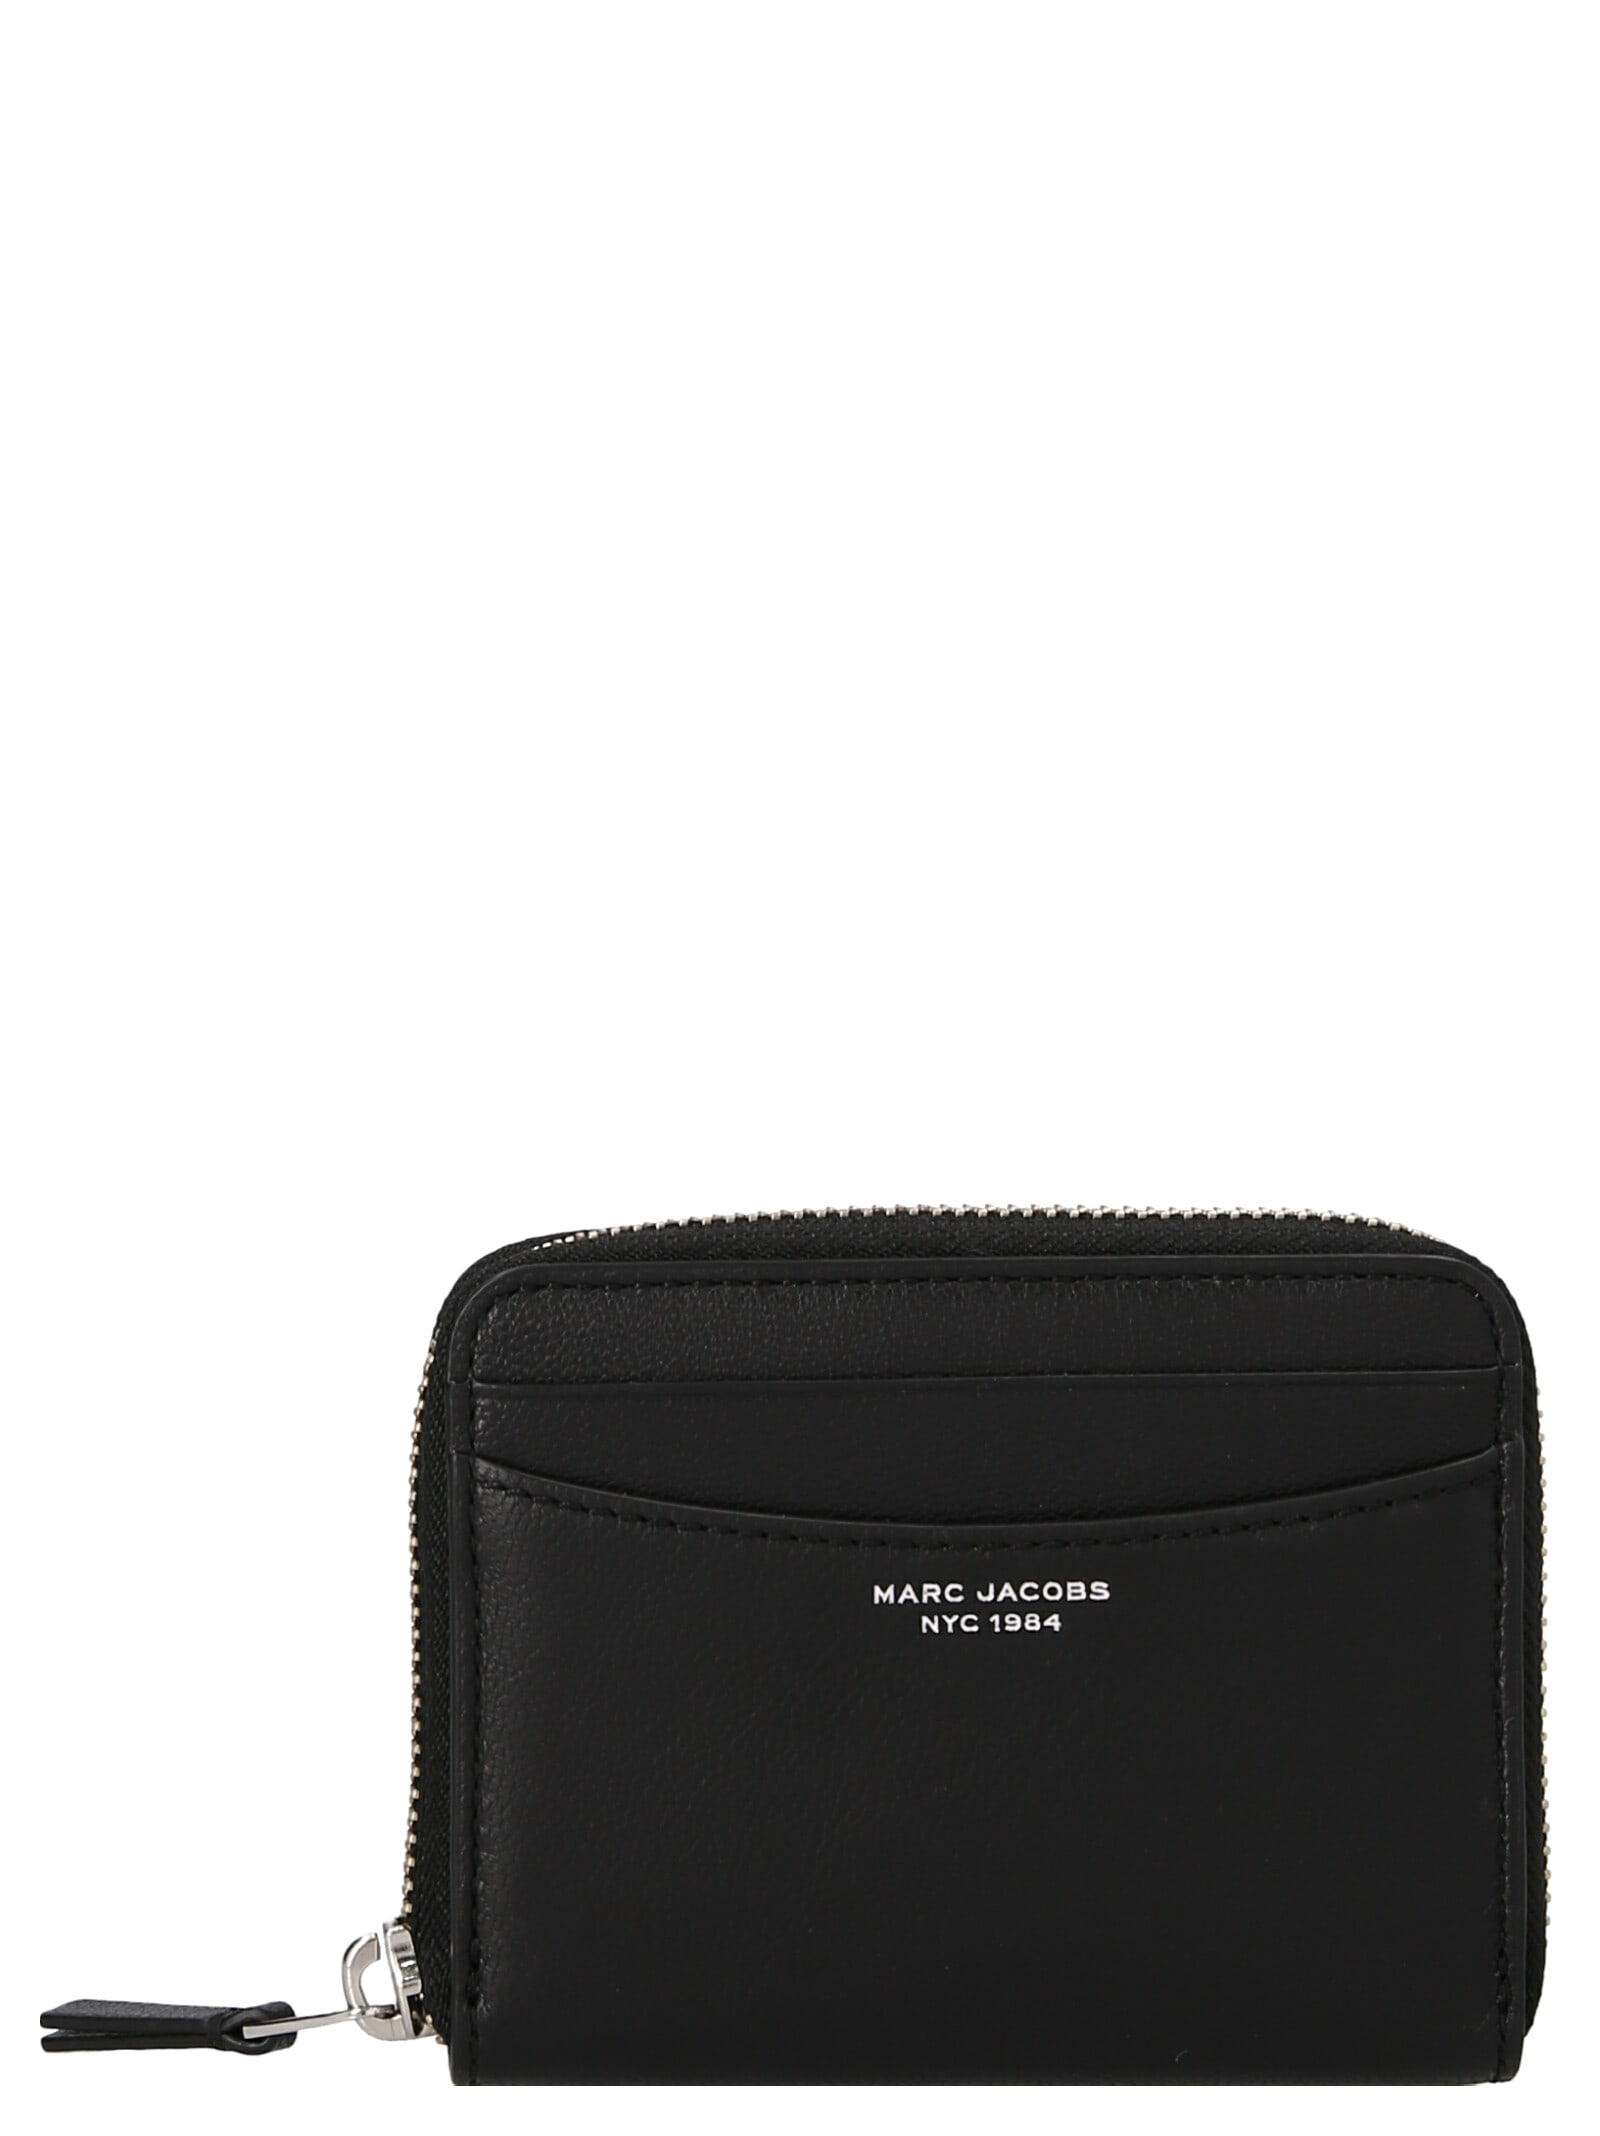 Marc Jacobs the Slim 84 Wallet